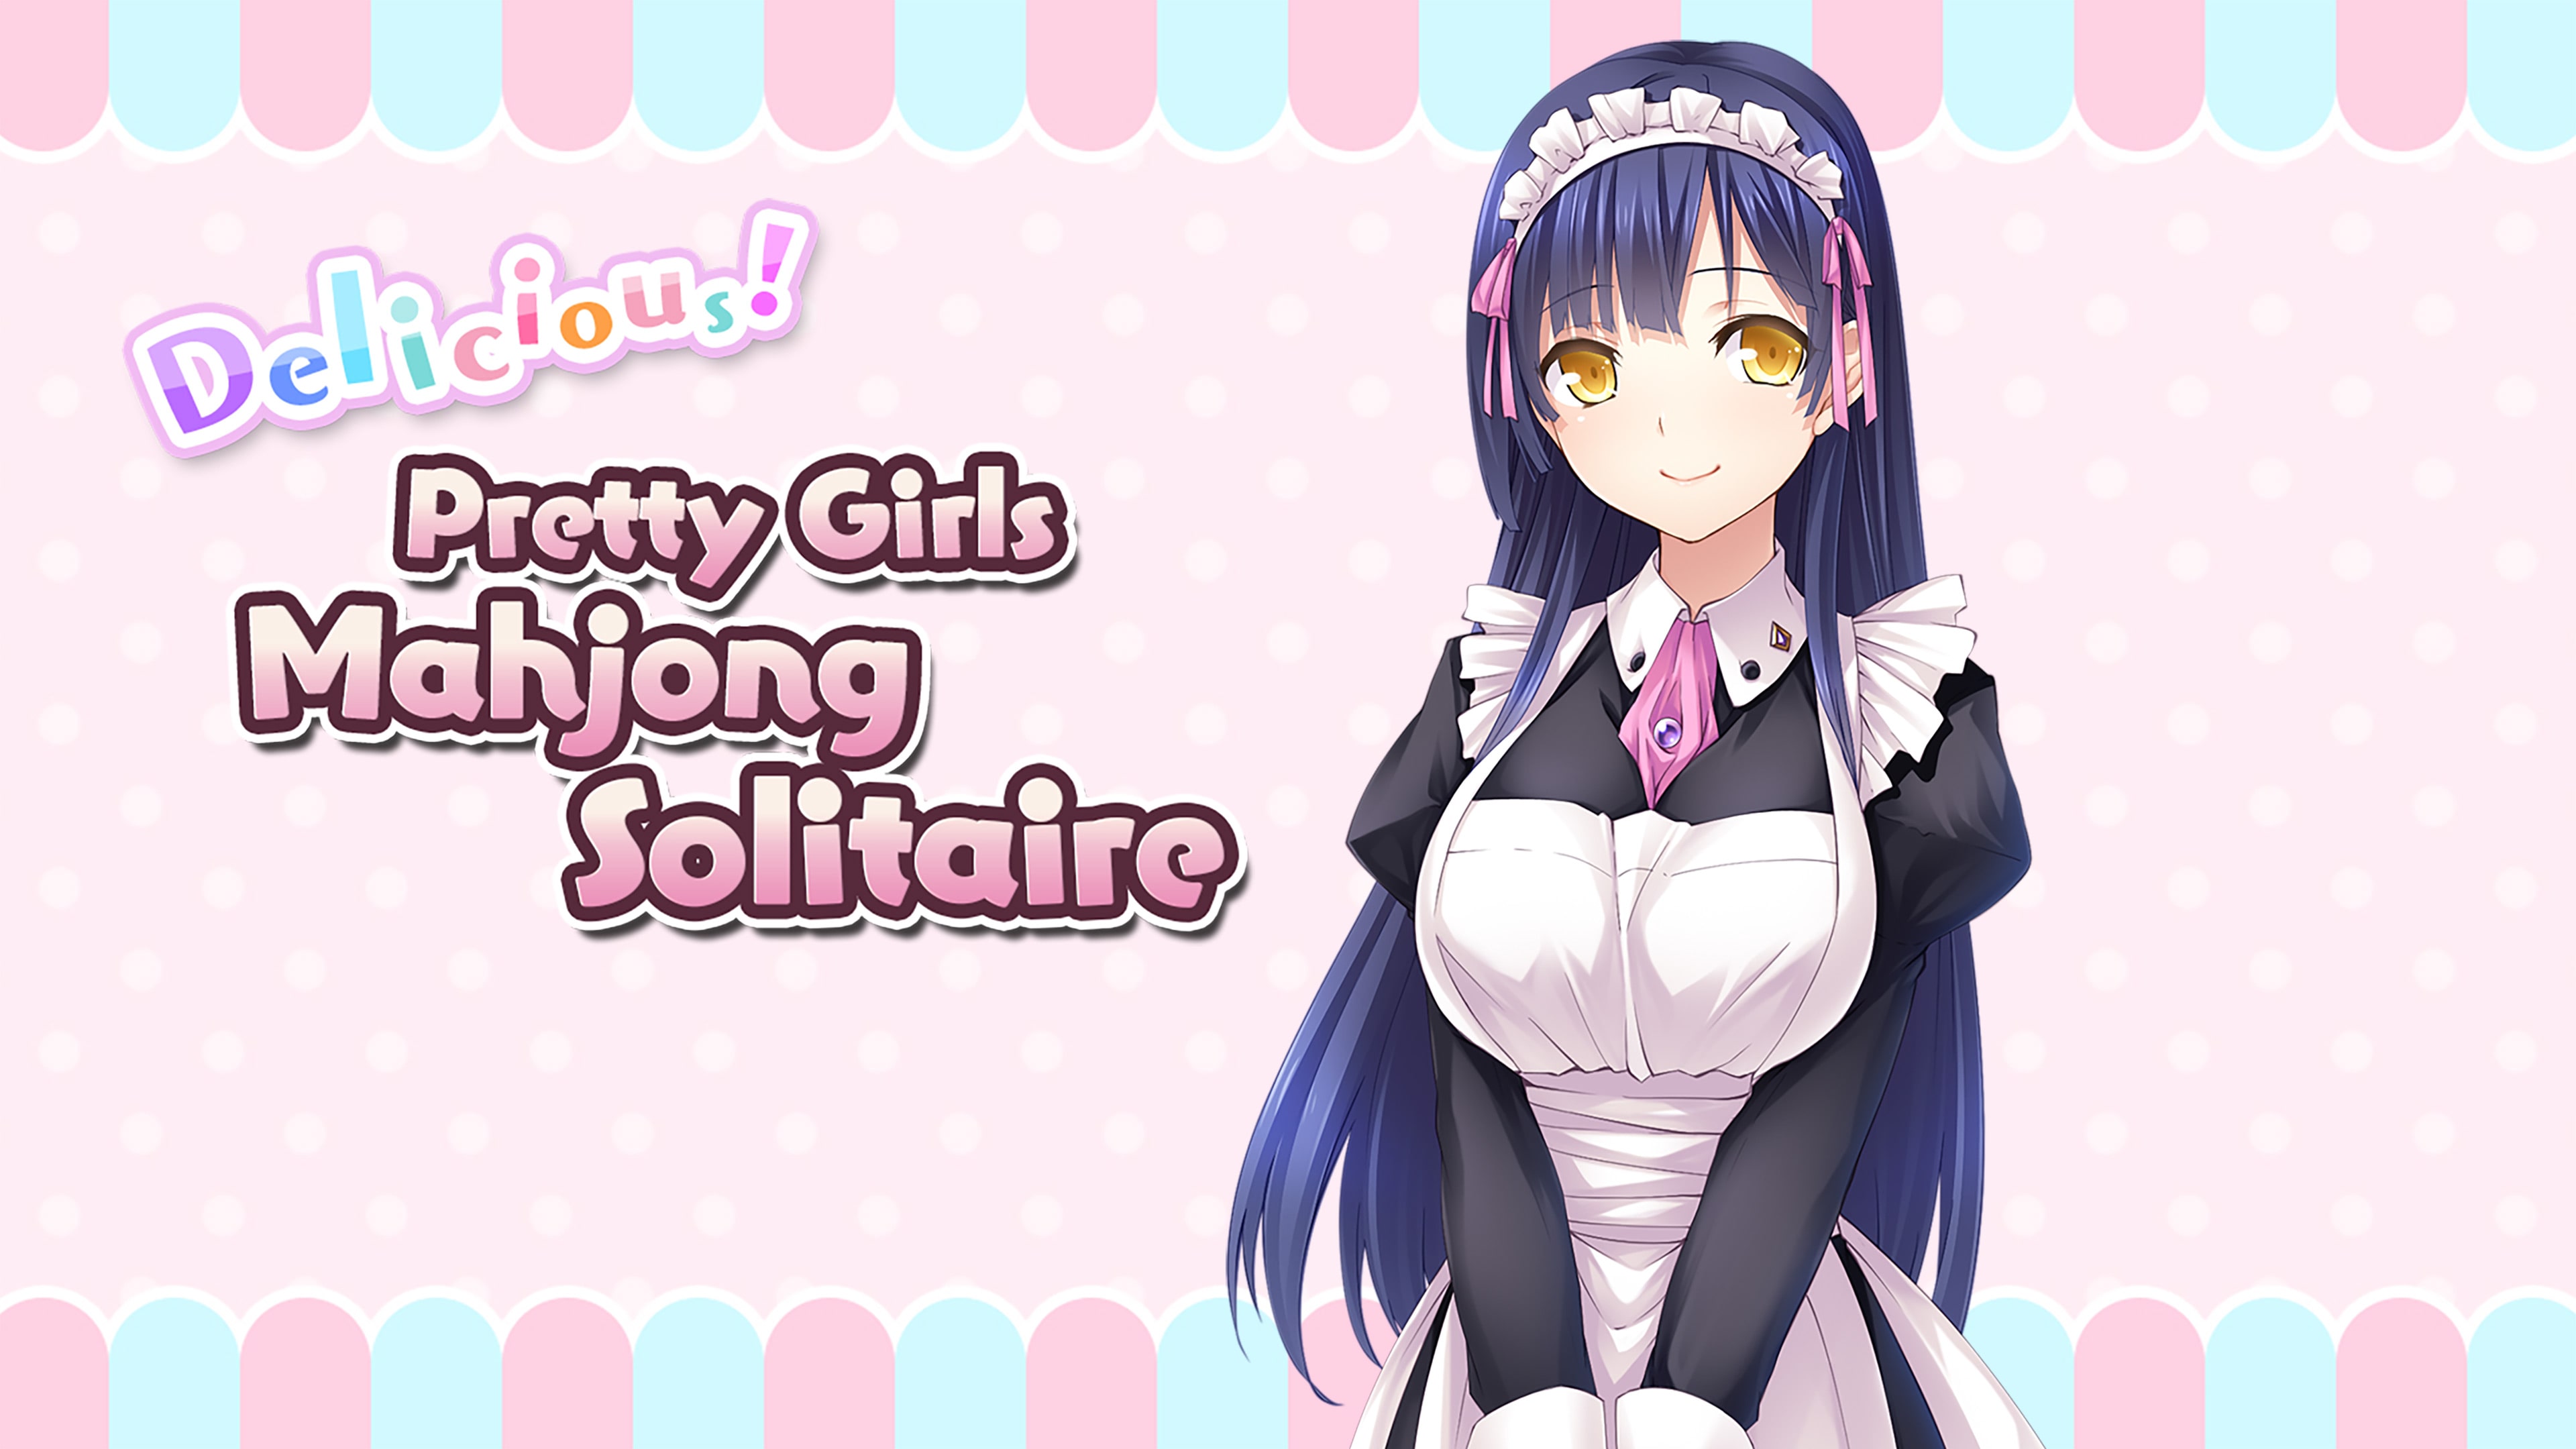 Delicious! Pretty Girls Mahjong Solitaire (English, Japanese)